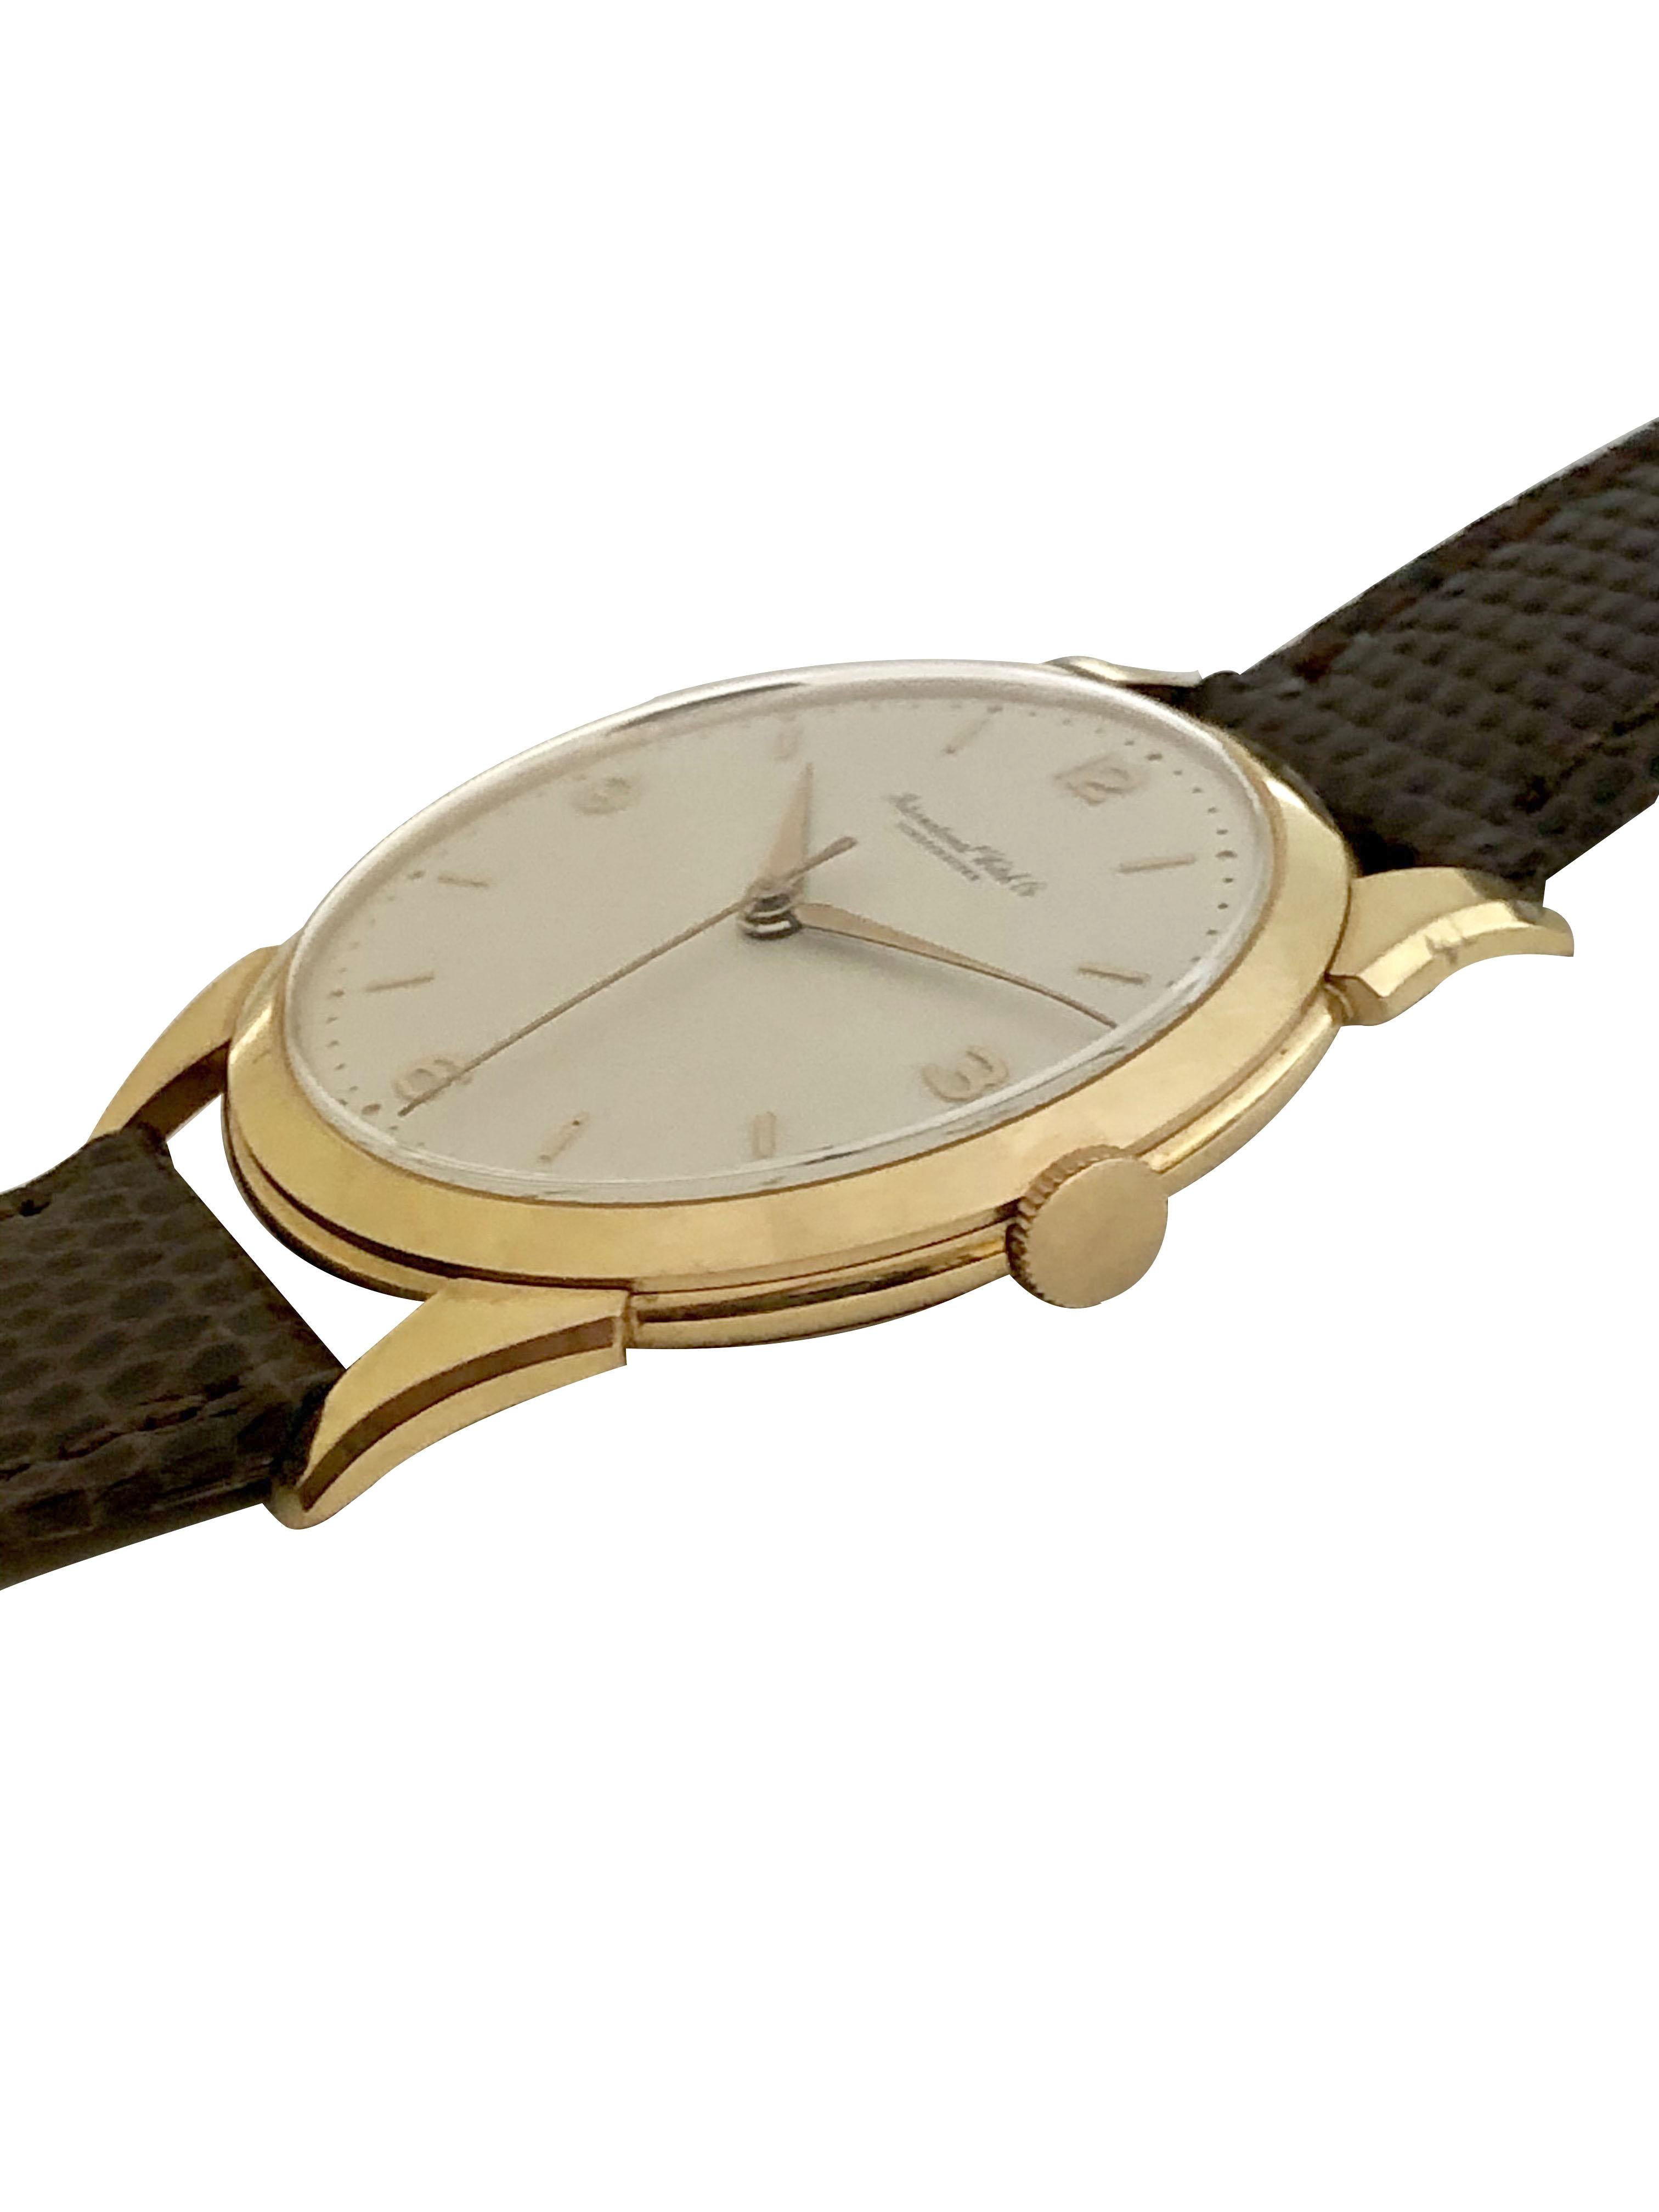 Circa 1950 IWC International Watch Company Wrist Watch, 36 M.M. 3 Piece 18K Yellow Gold Case with Flared lugs, 17 Jewel Nickle Lever mechanical, Manual wind Movement, Original condition Mint cadran White Matt finished with raised Gold markers and